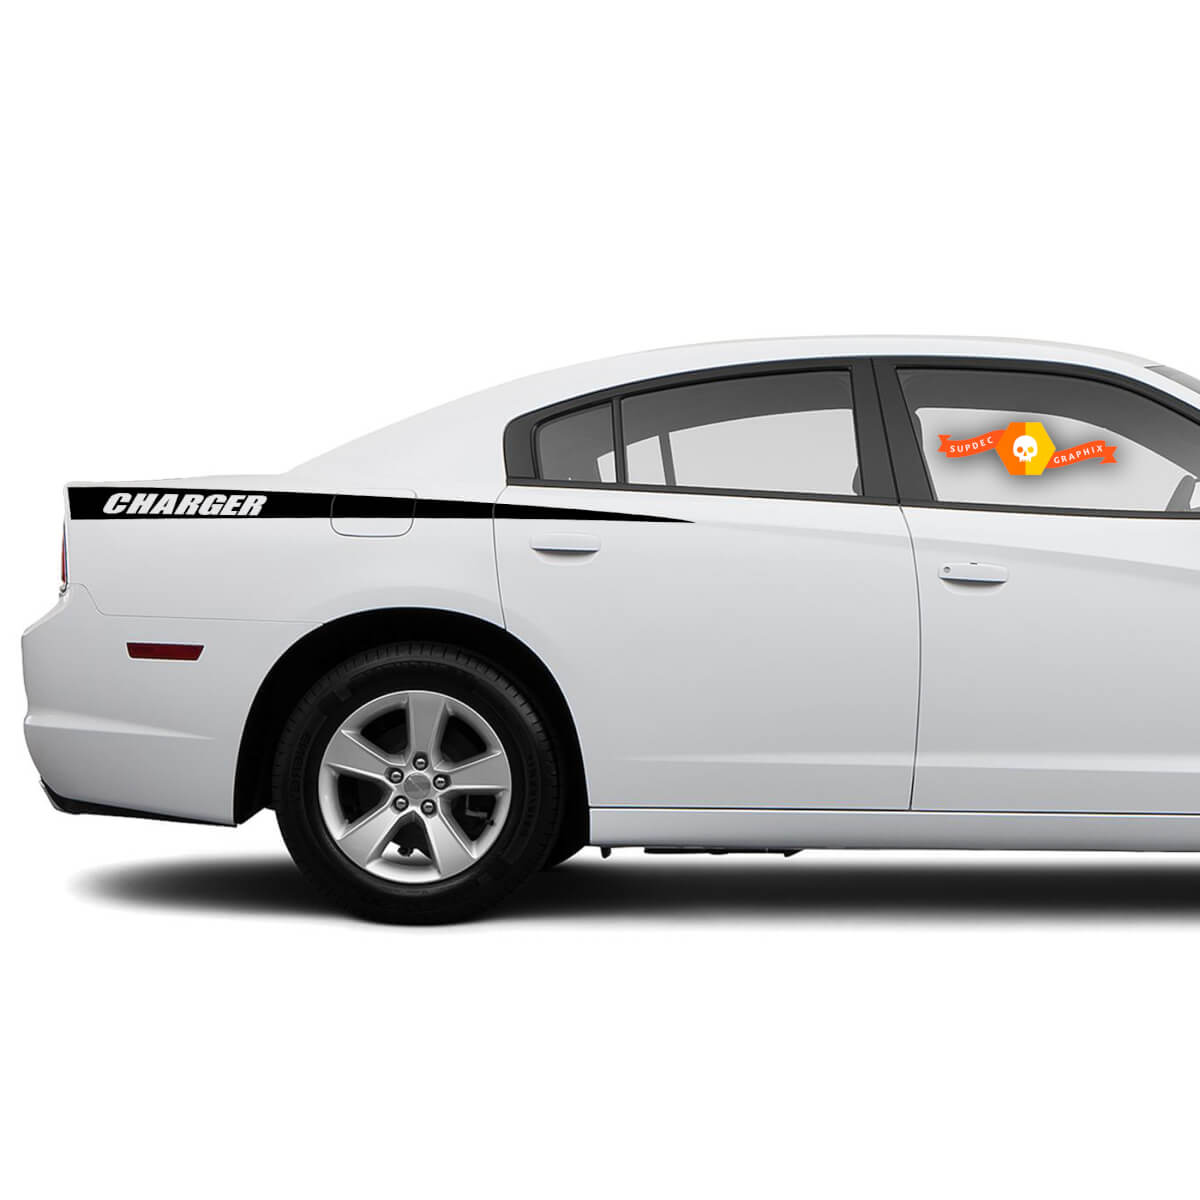 Dodge Charger Decal Sticker Side graphics fits to models 2011-2014 